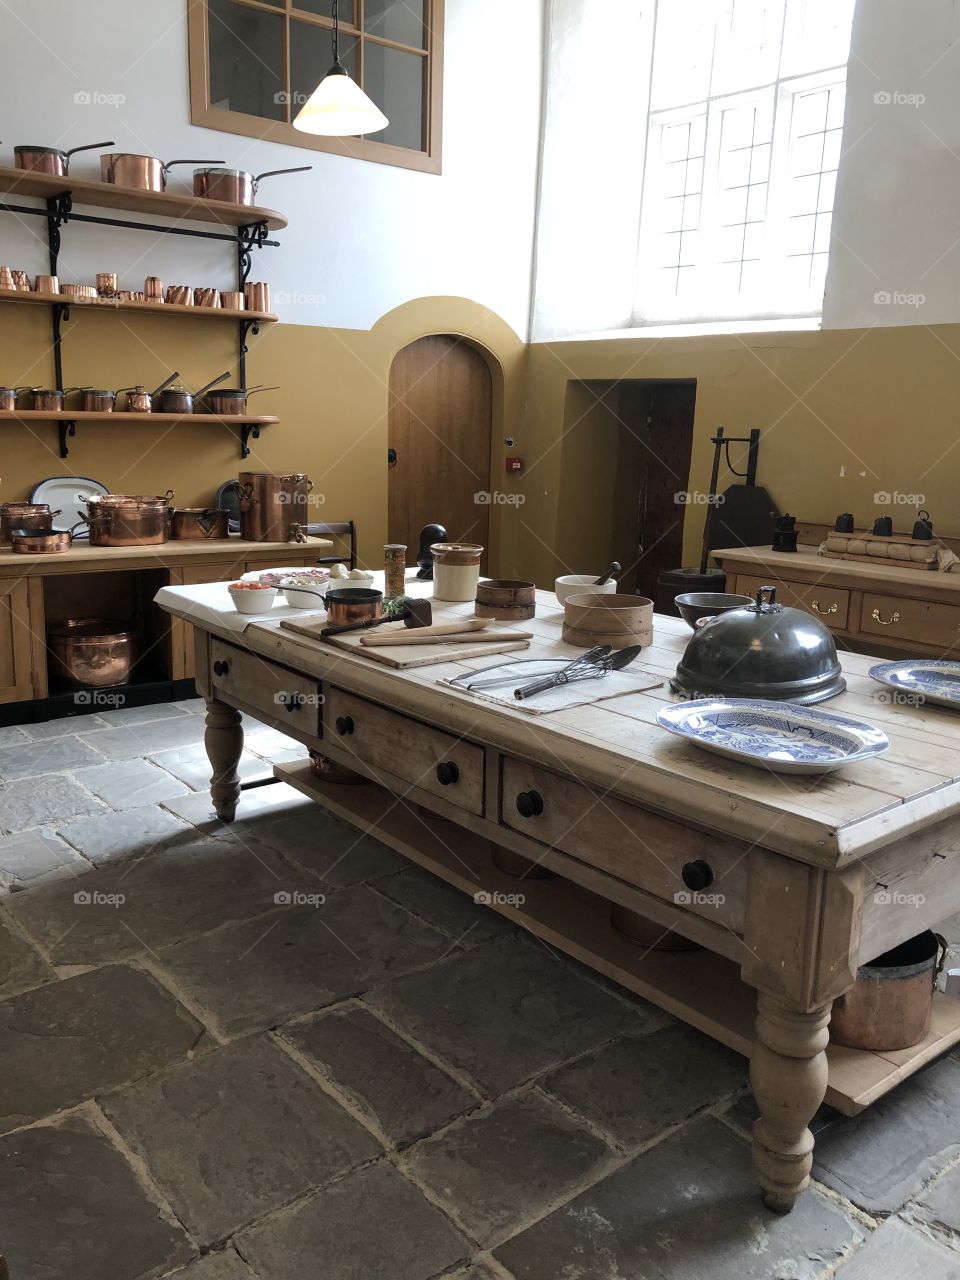 Kitchen  from the old days at St Fagans mansion house South Wales 🏴󠁧󠁢󠁷󠁬󠁳󠁿